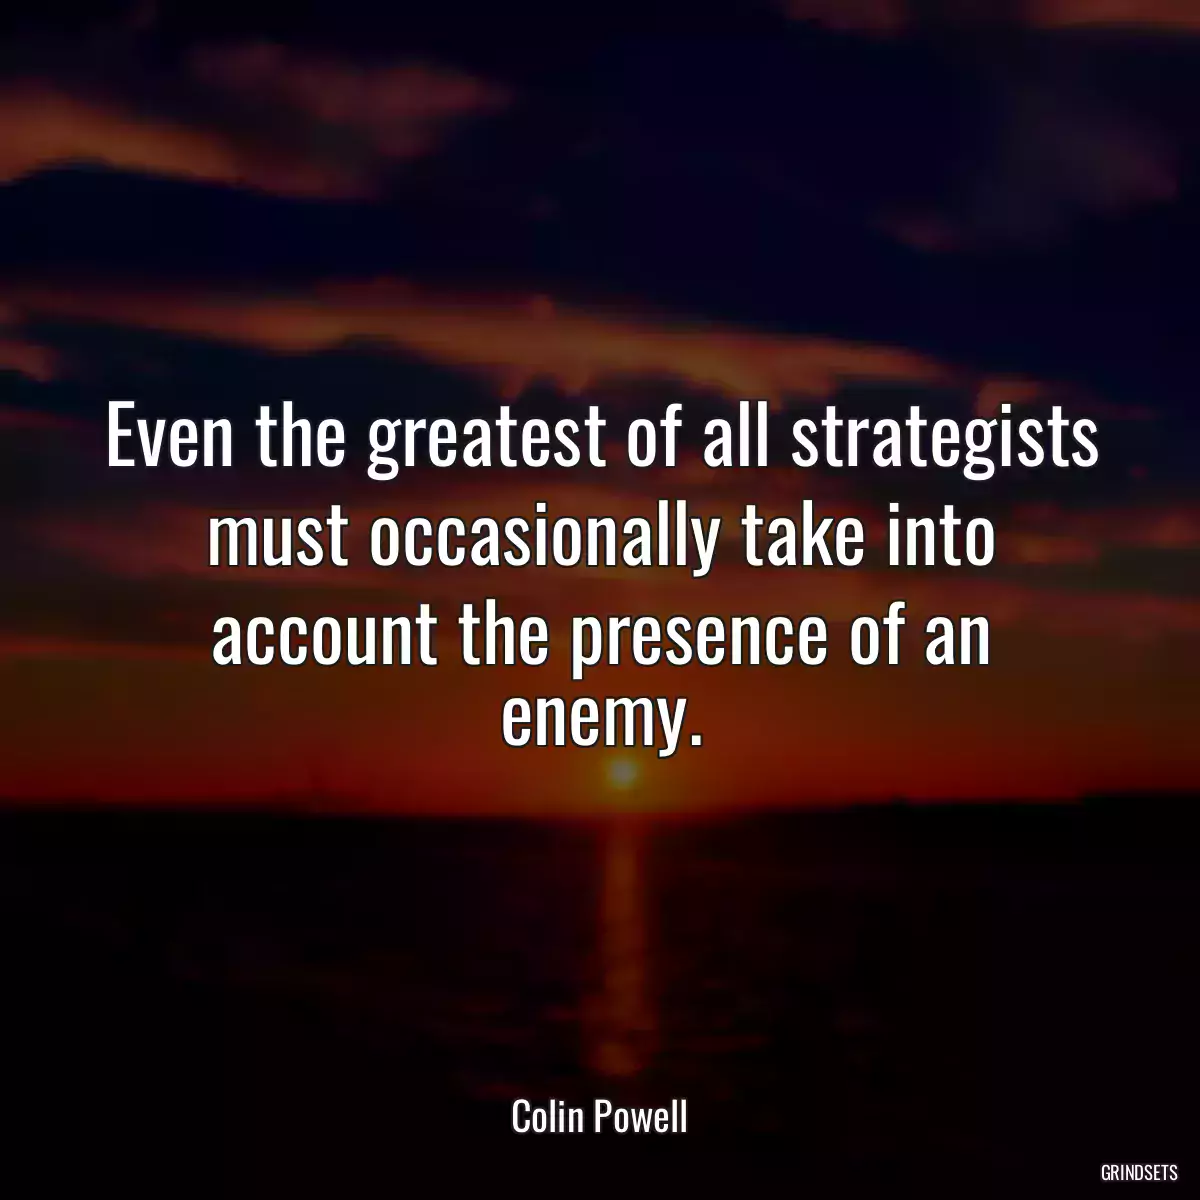 Even the greatest of all strategists must occasionally take into account the presence of an enemy.